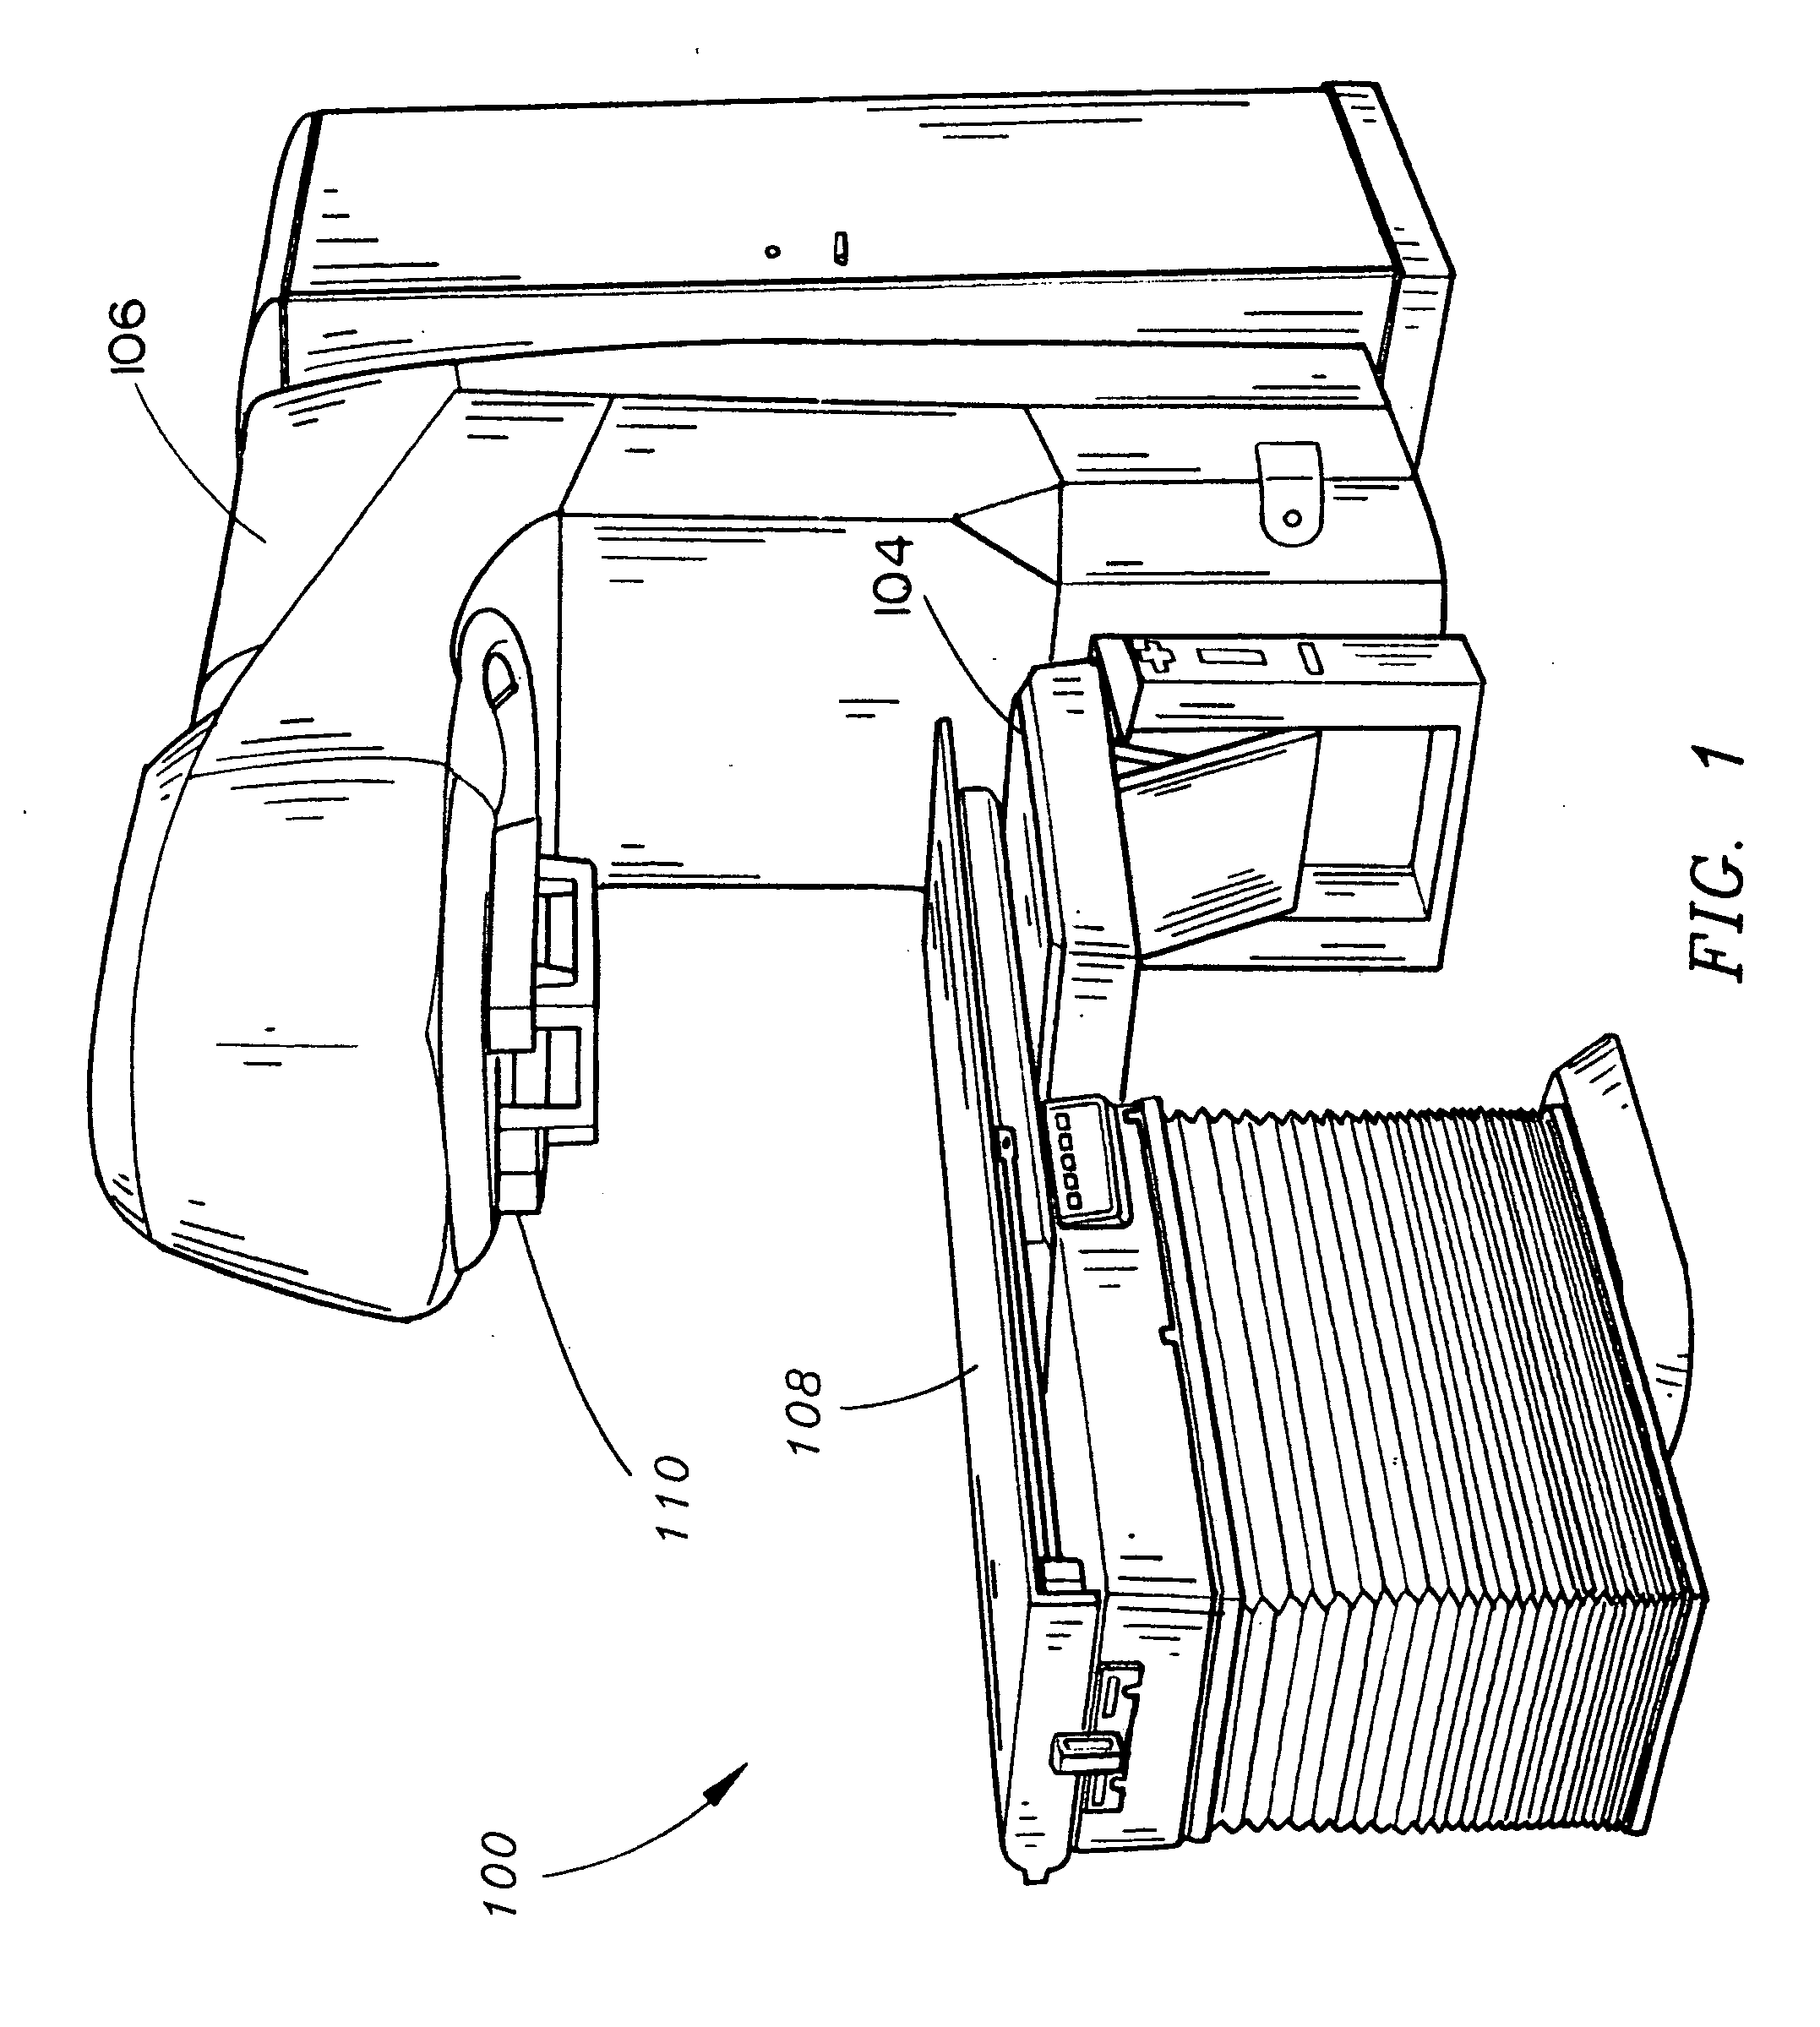 Multi-leaf collimator based field size clipping for automatic adaptation to allowed image area